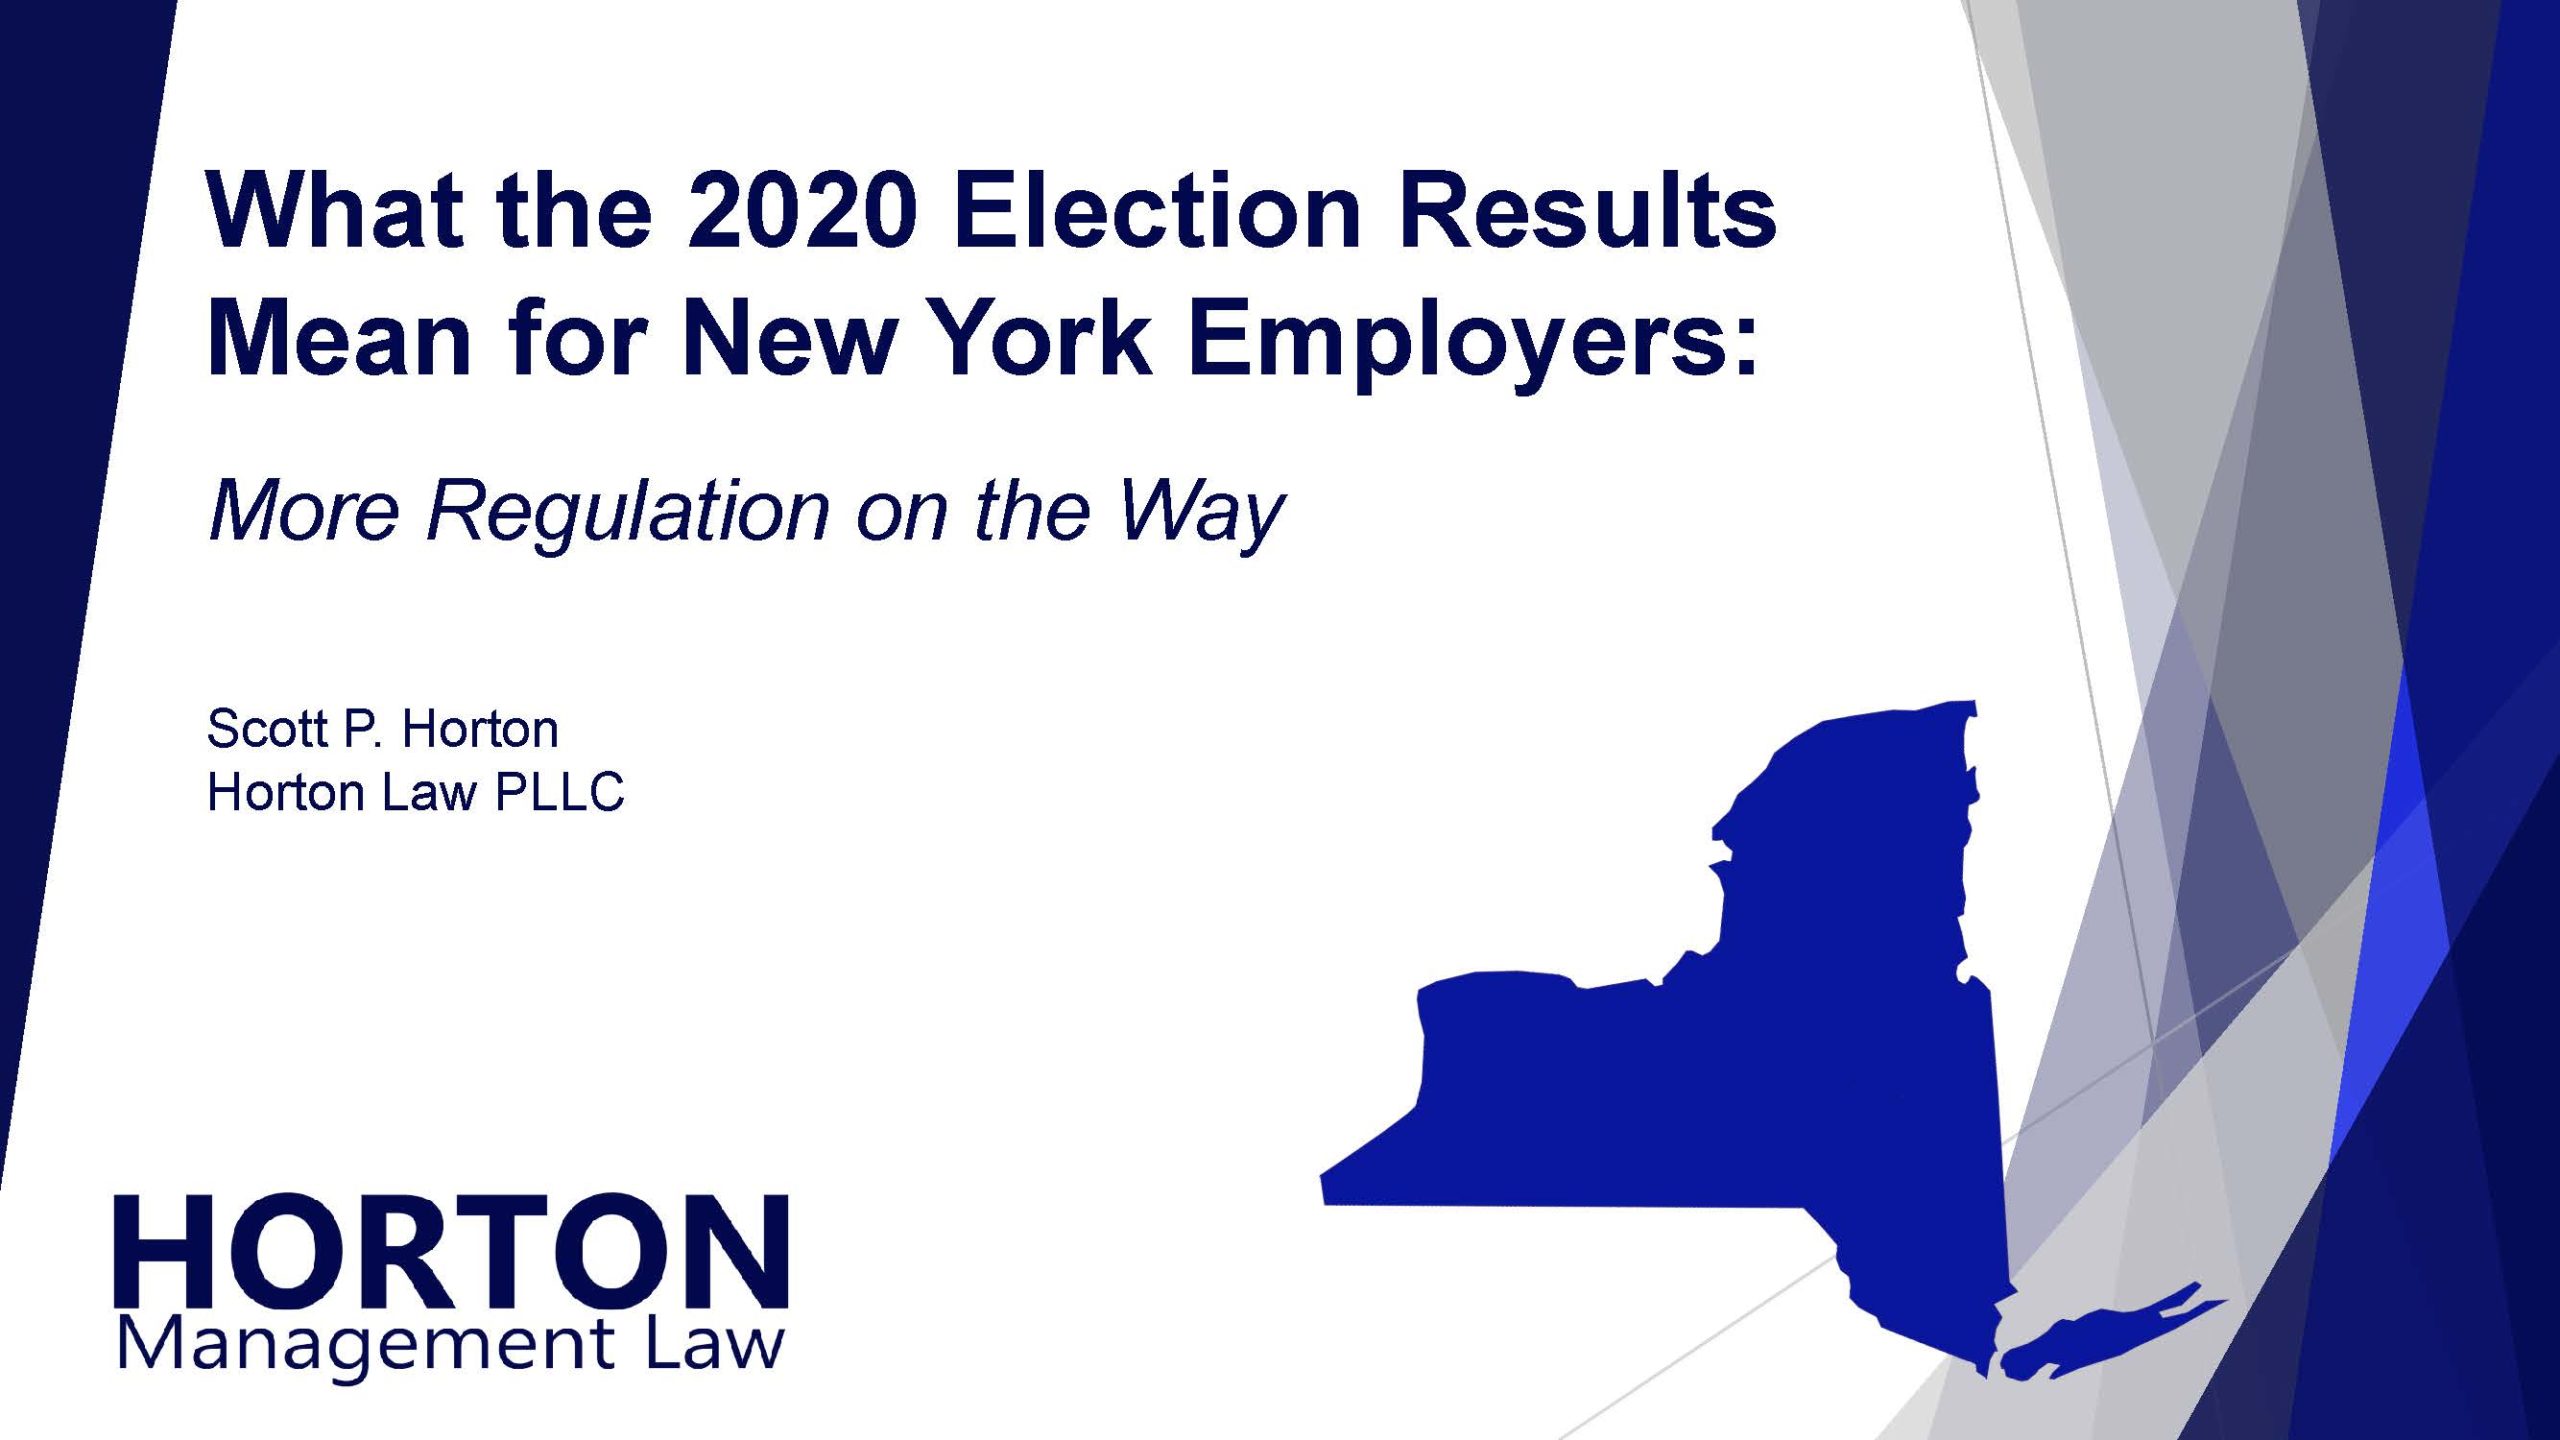 2020 Election Results for NY Employers Cover Slide